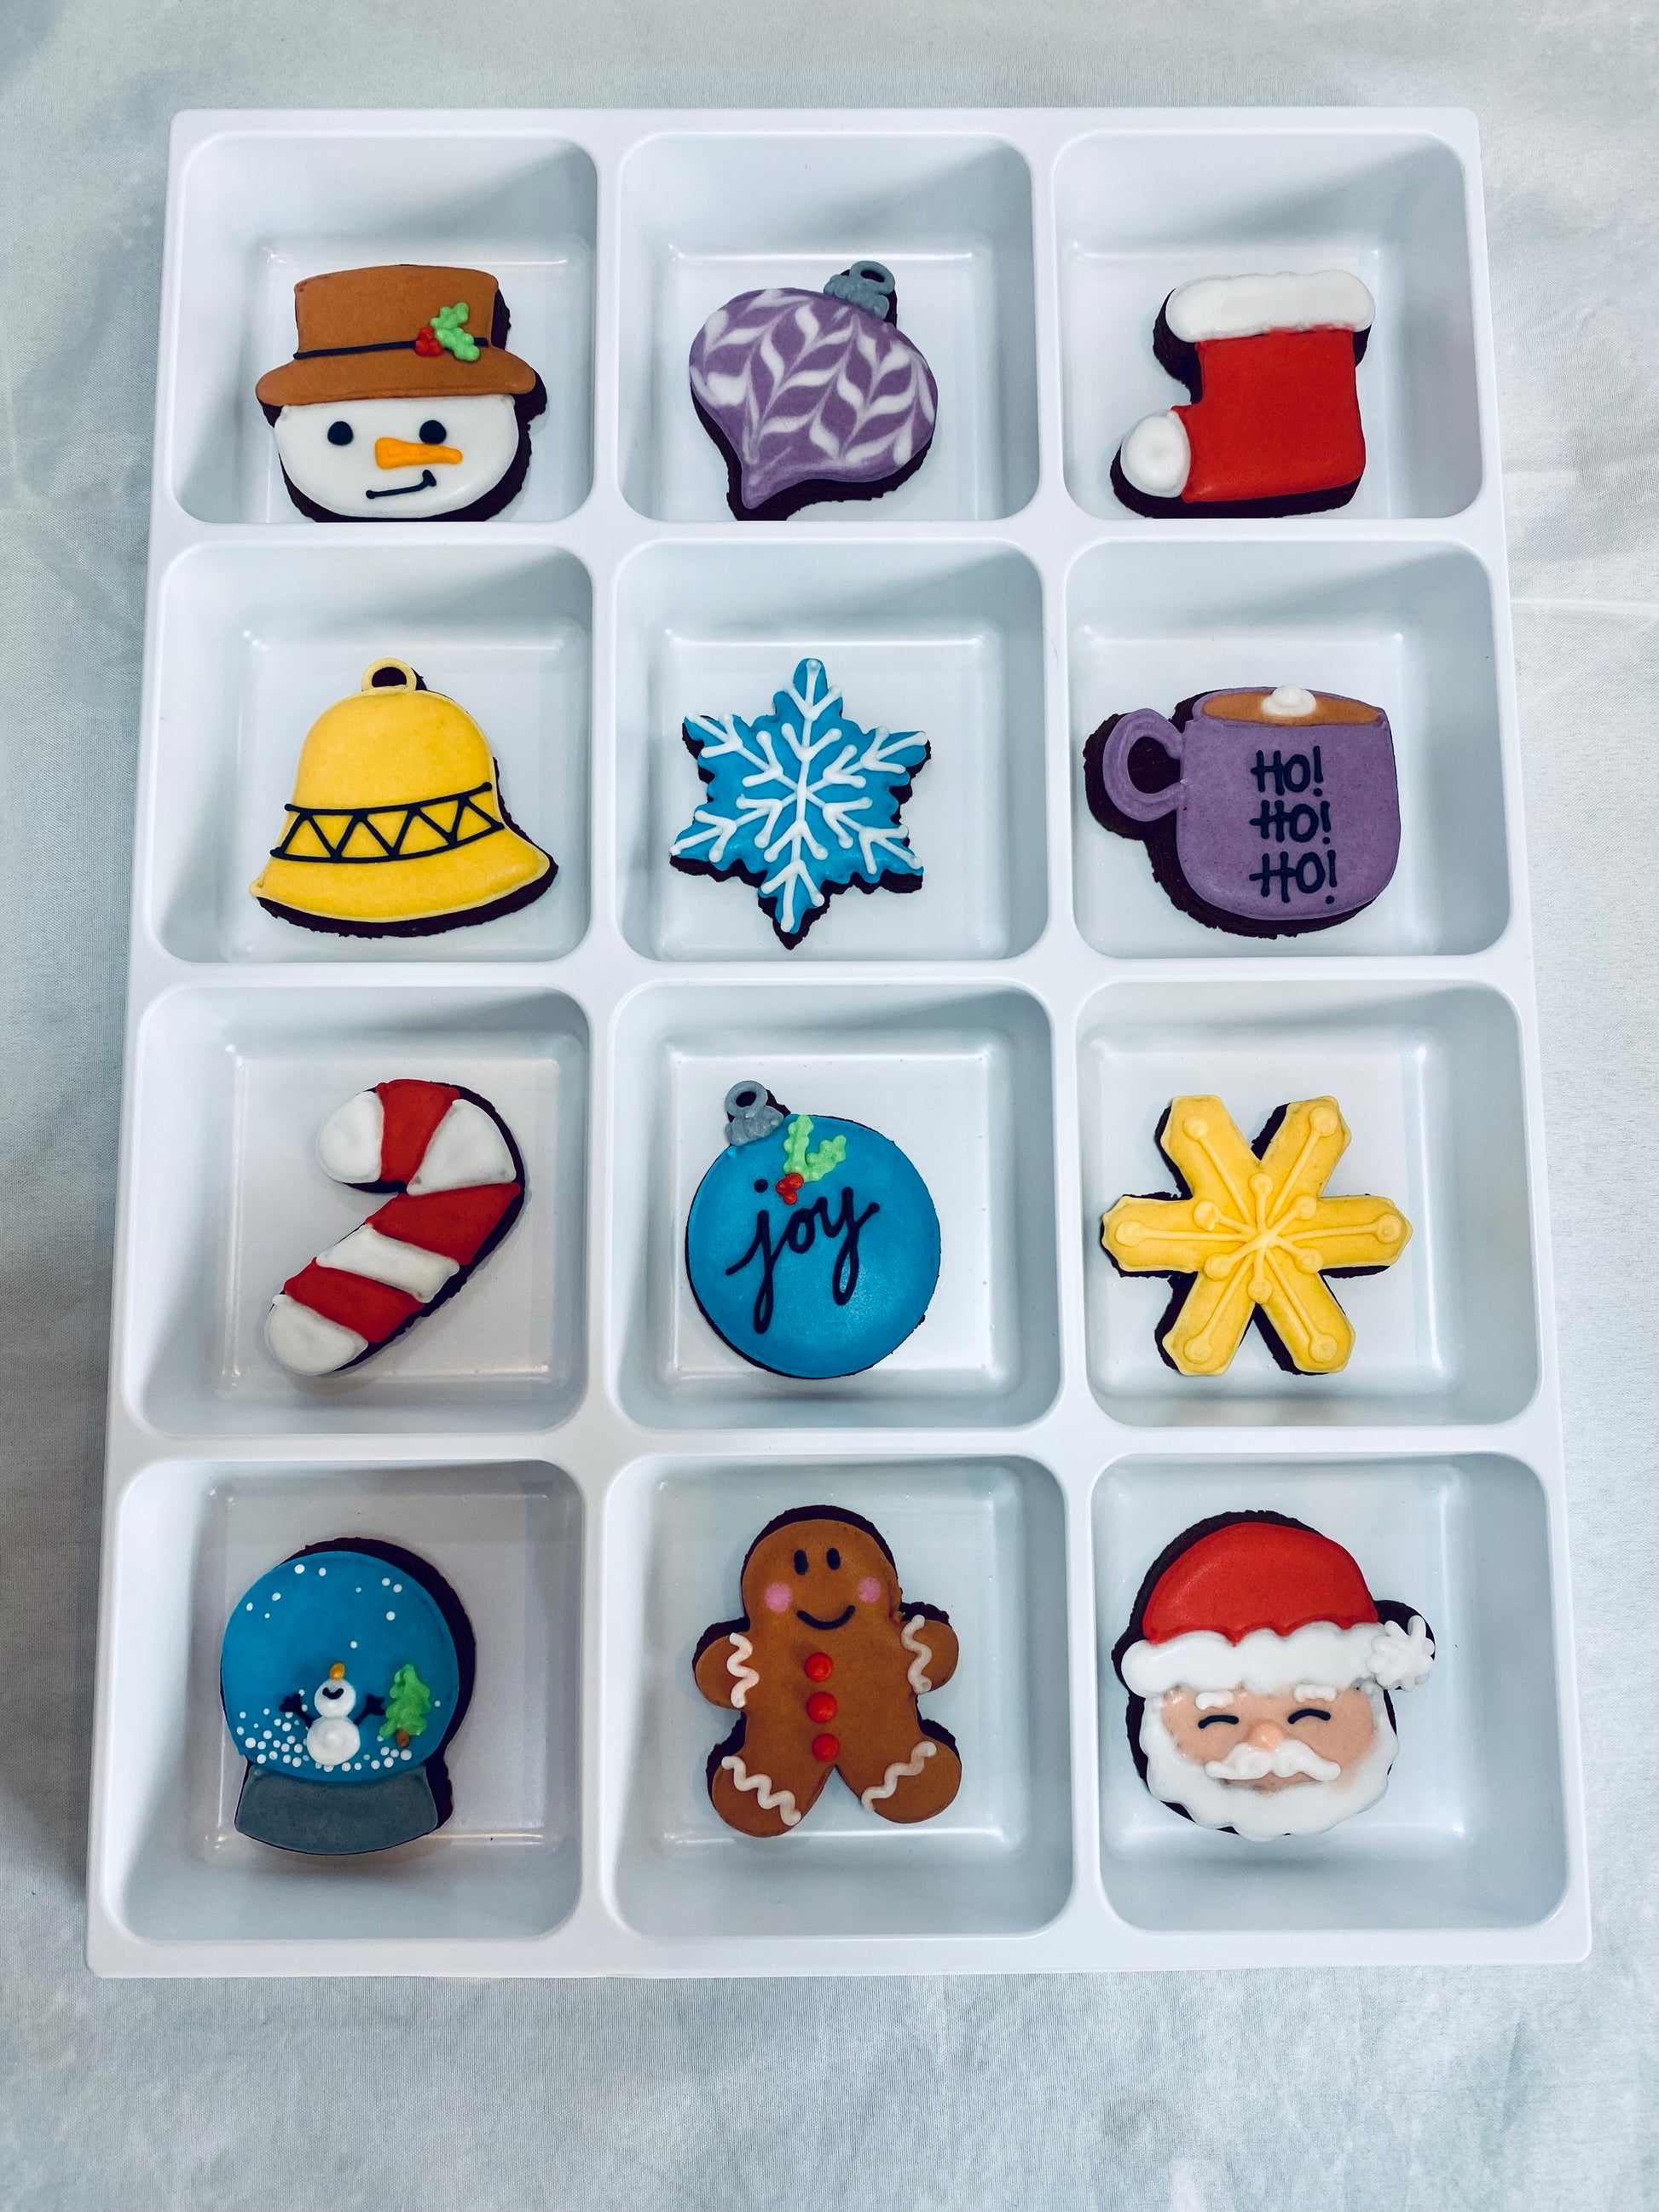 a sneak peek inside the biscuit advent calendar to show each of the mini biscuits you receive.